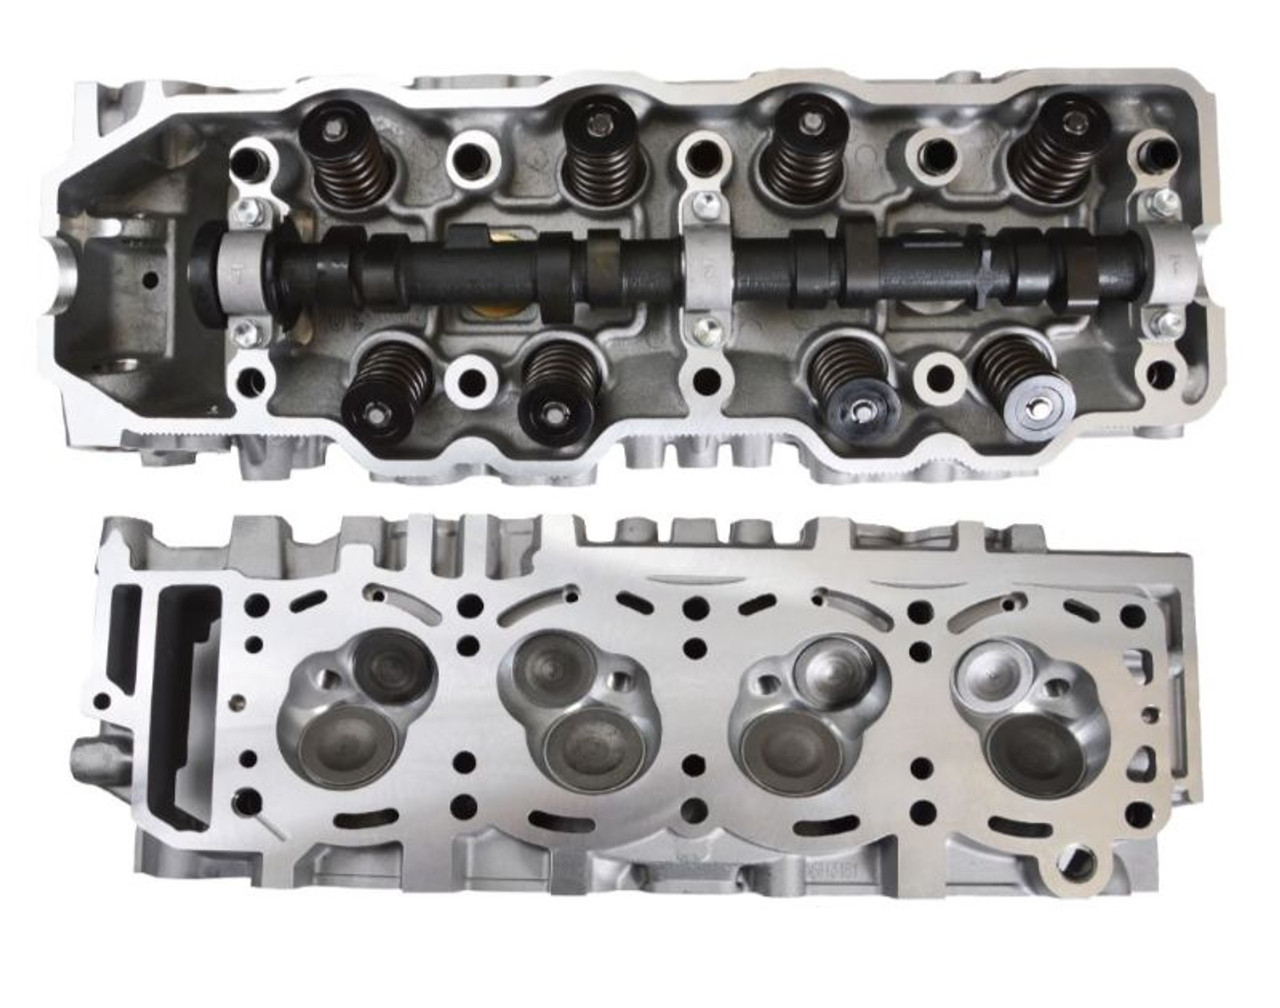 1985 Toyota Celica 2.4L Engine Cylinder Head Assembly CH1072N -2